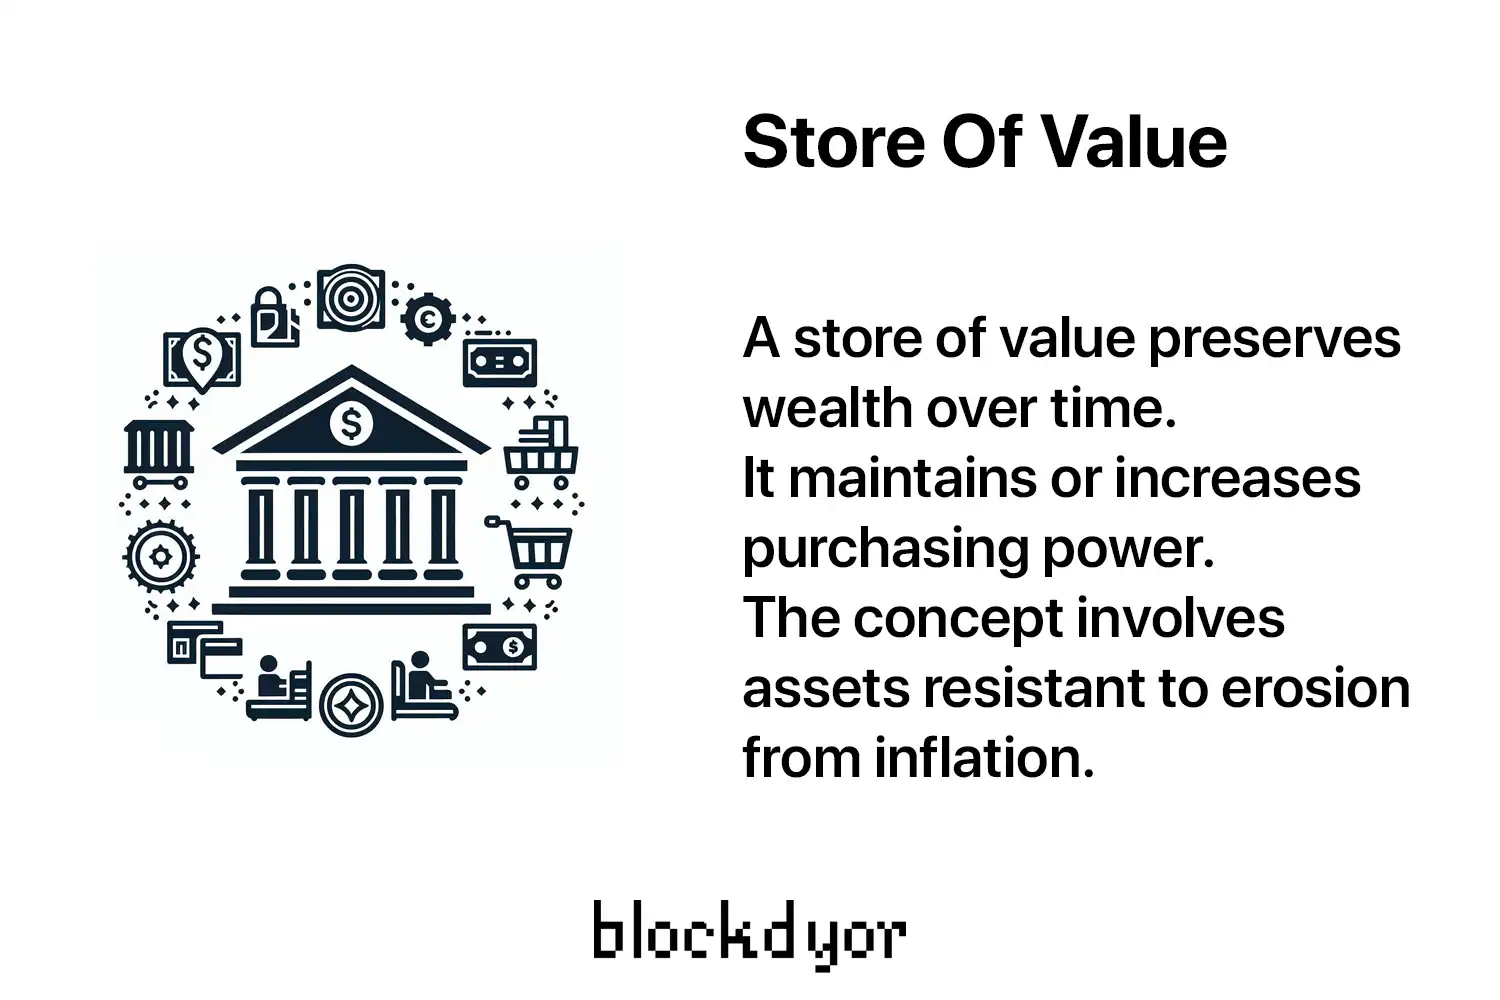 Store Of Value Overview